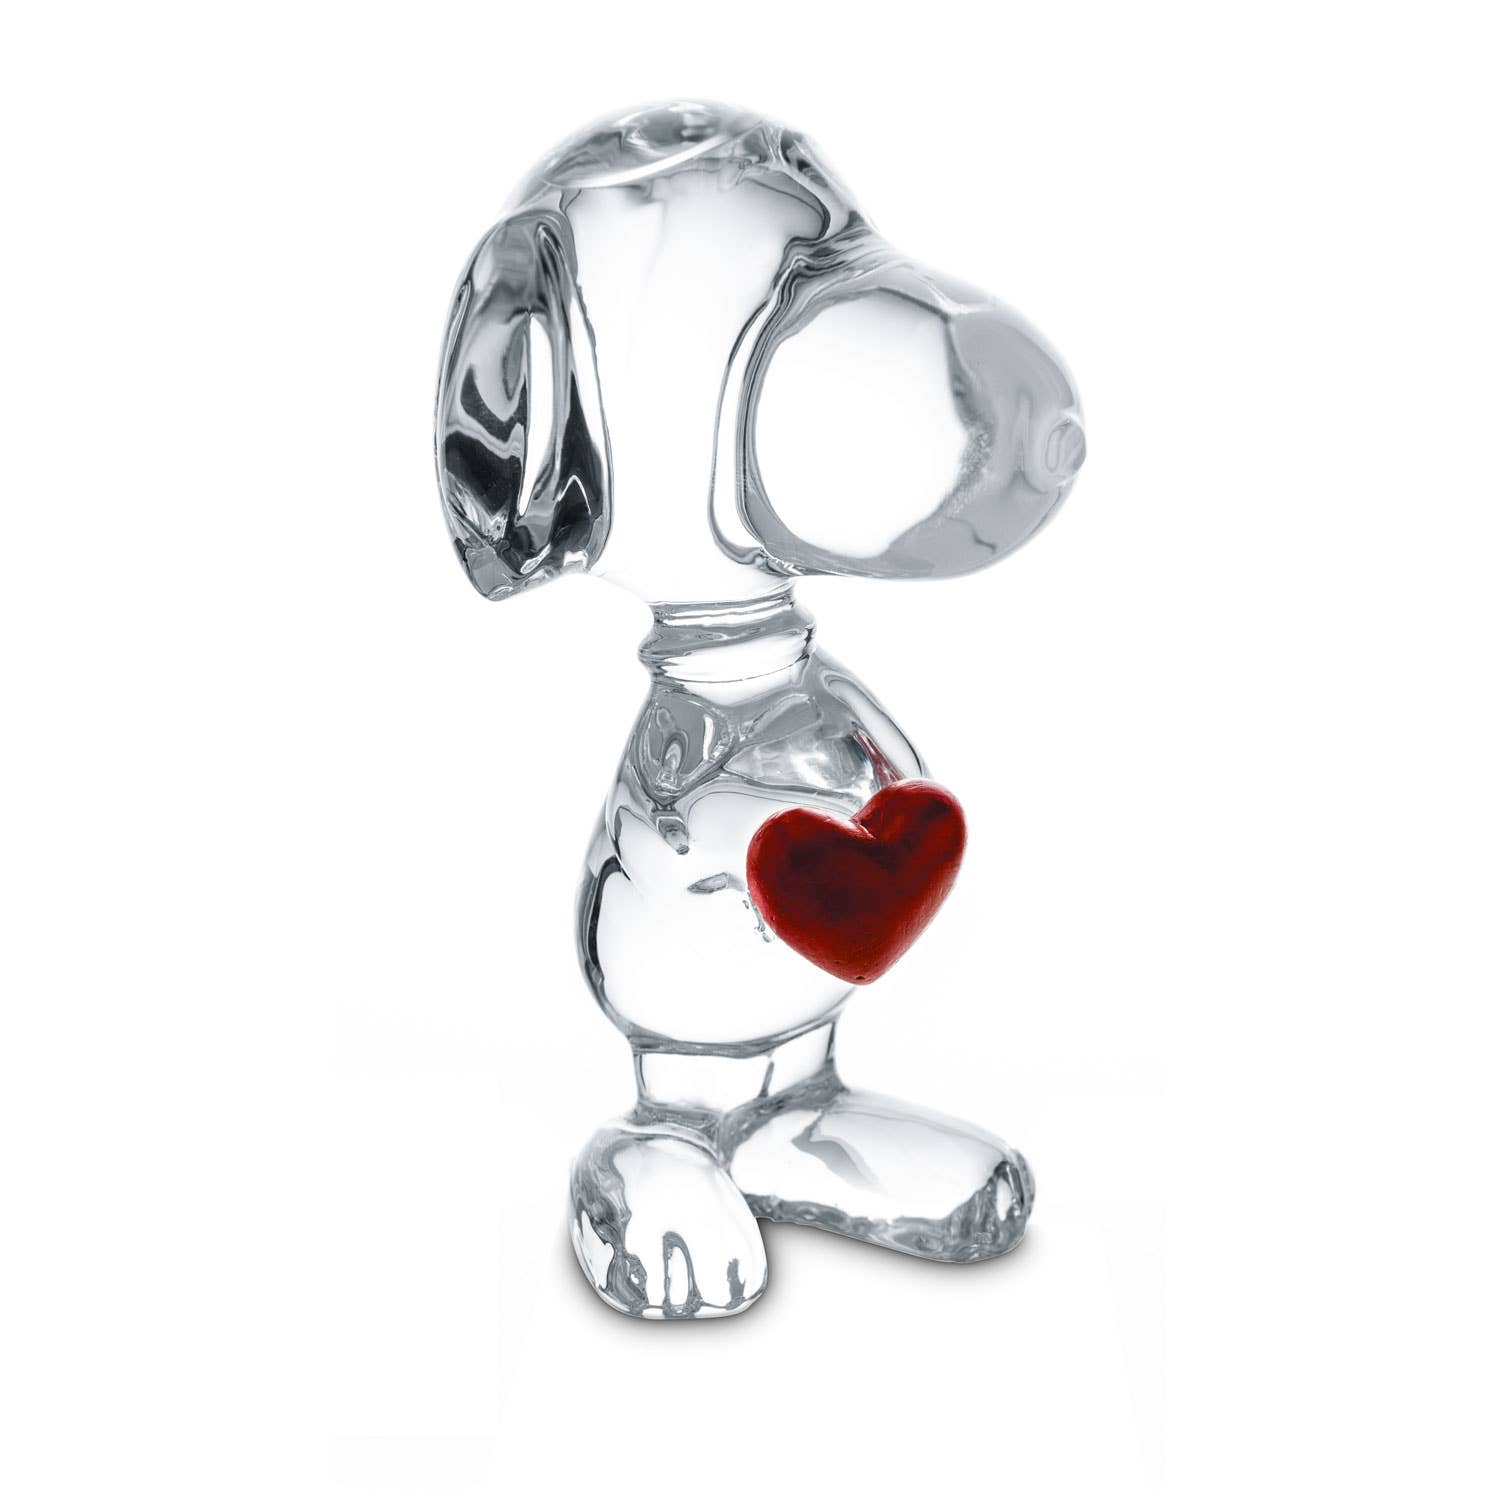 Snoopy with Red Heart